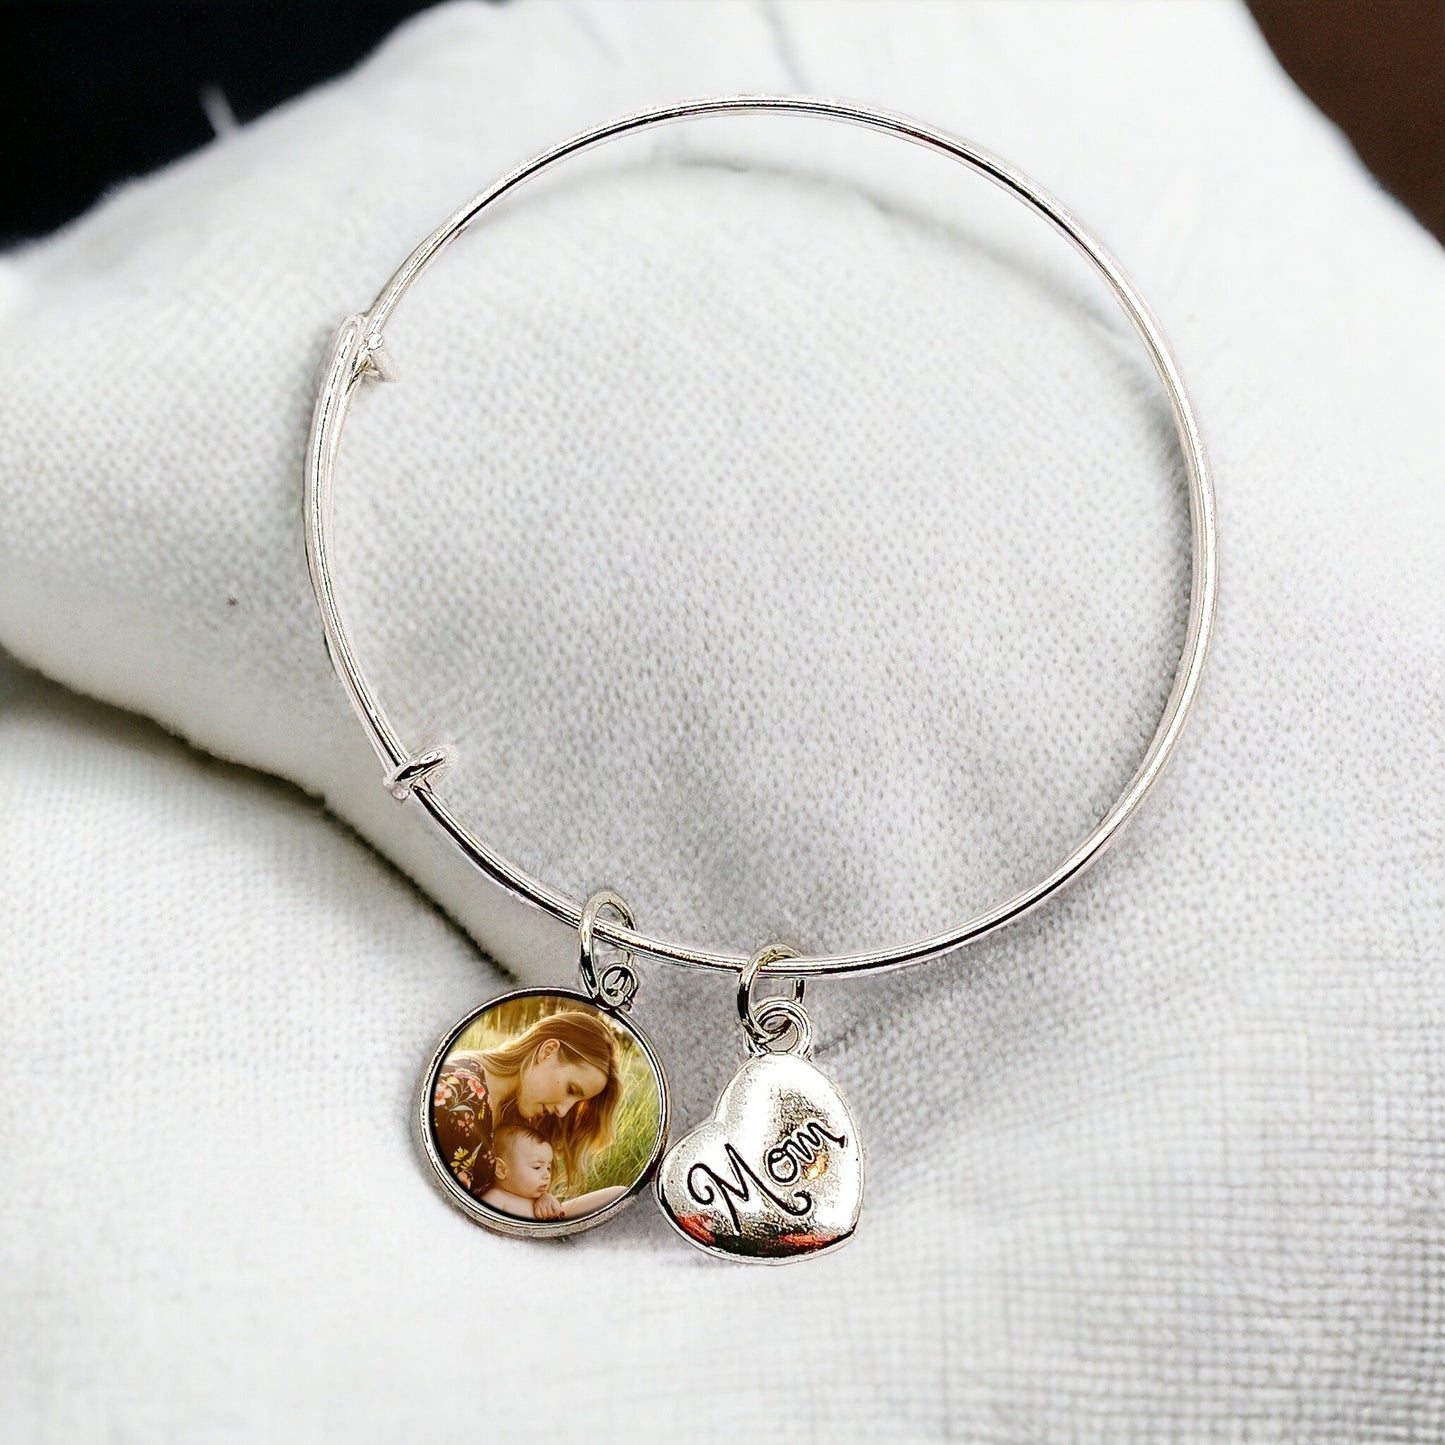 Customizable Mom Heart Charm Silver Bracelet with Personalized Photo Charm